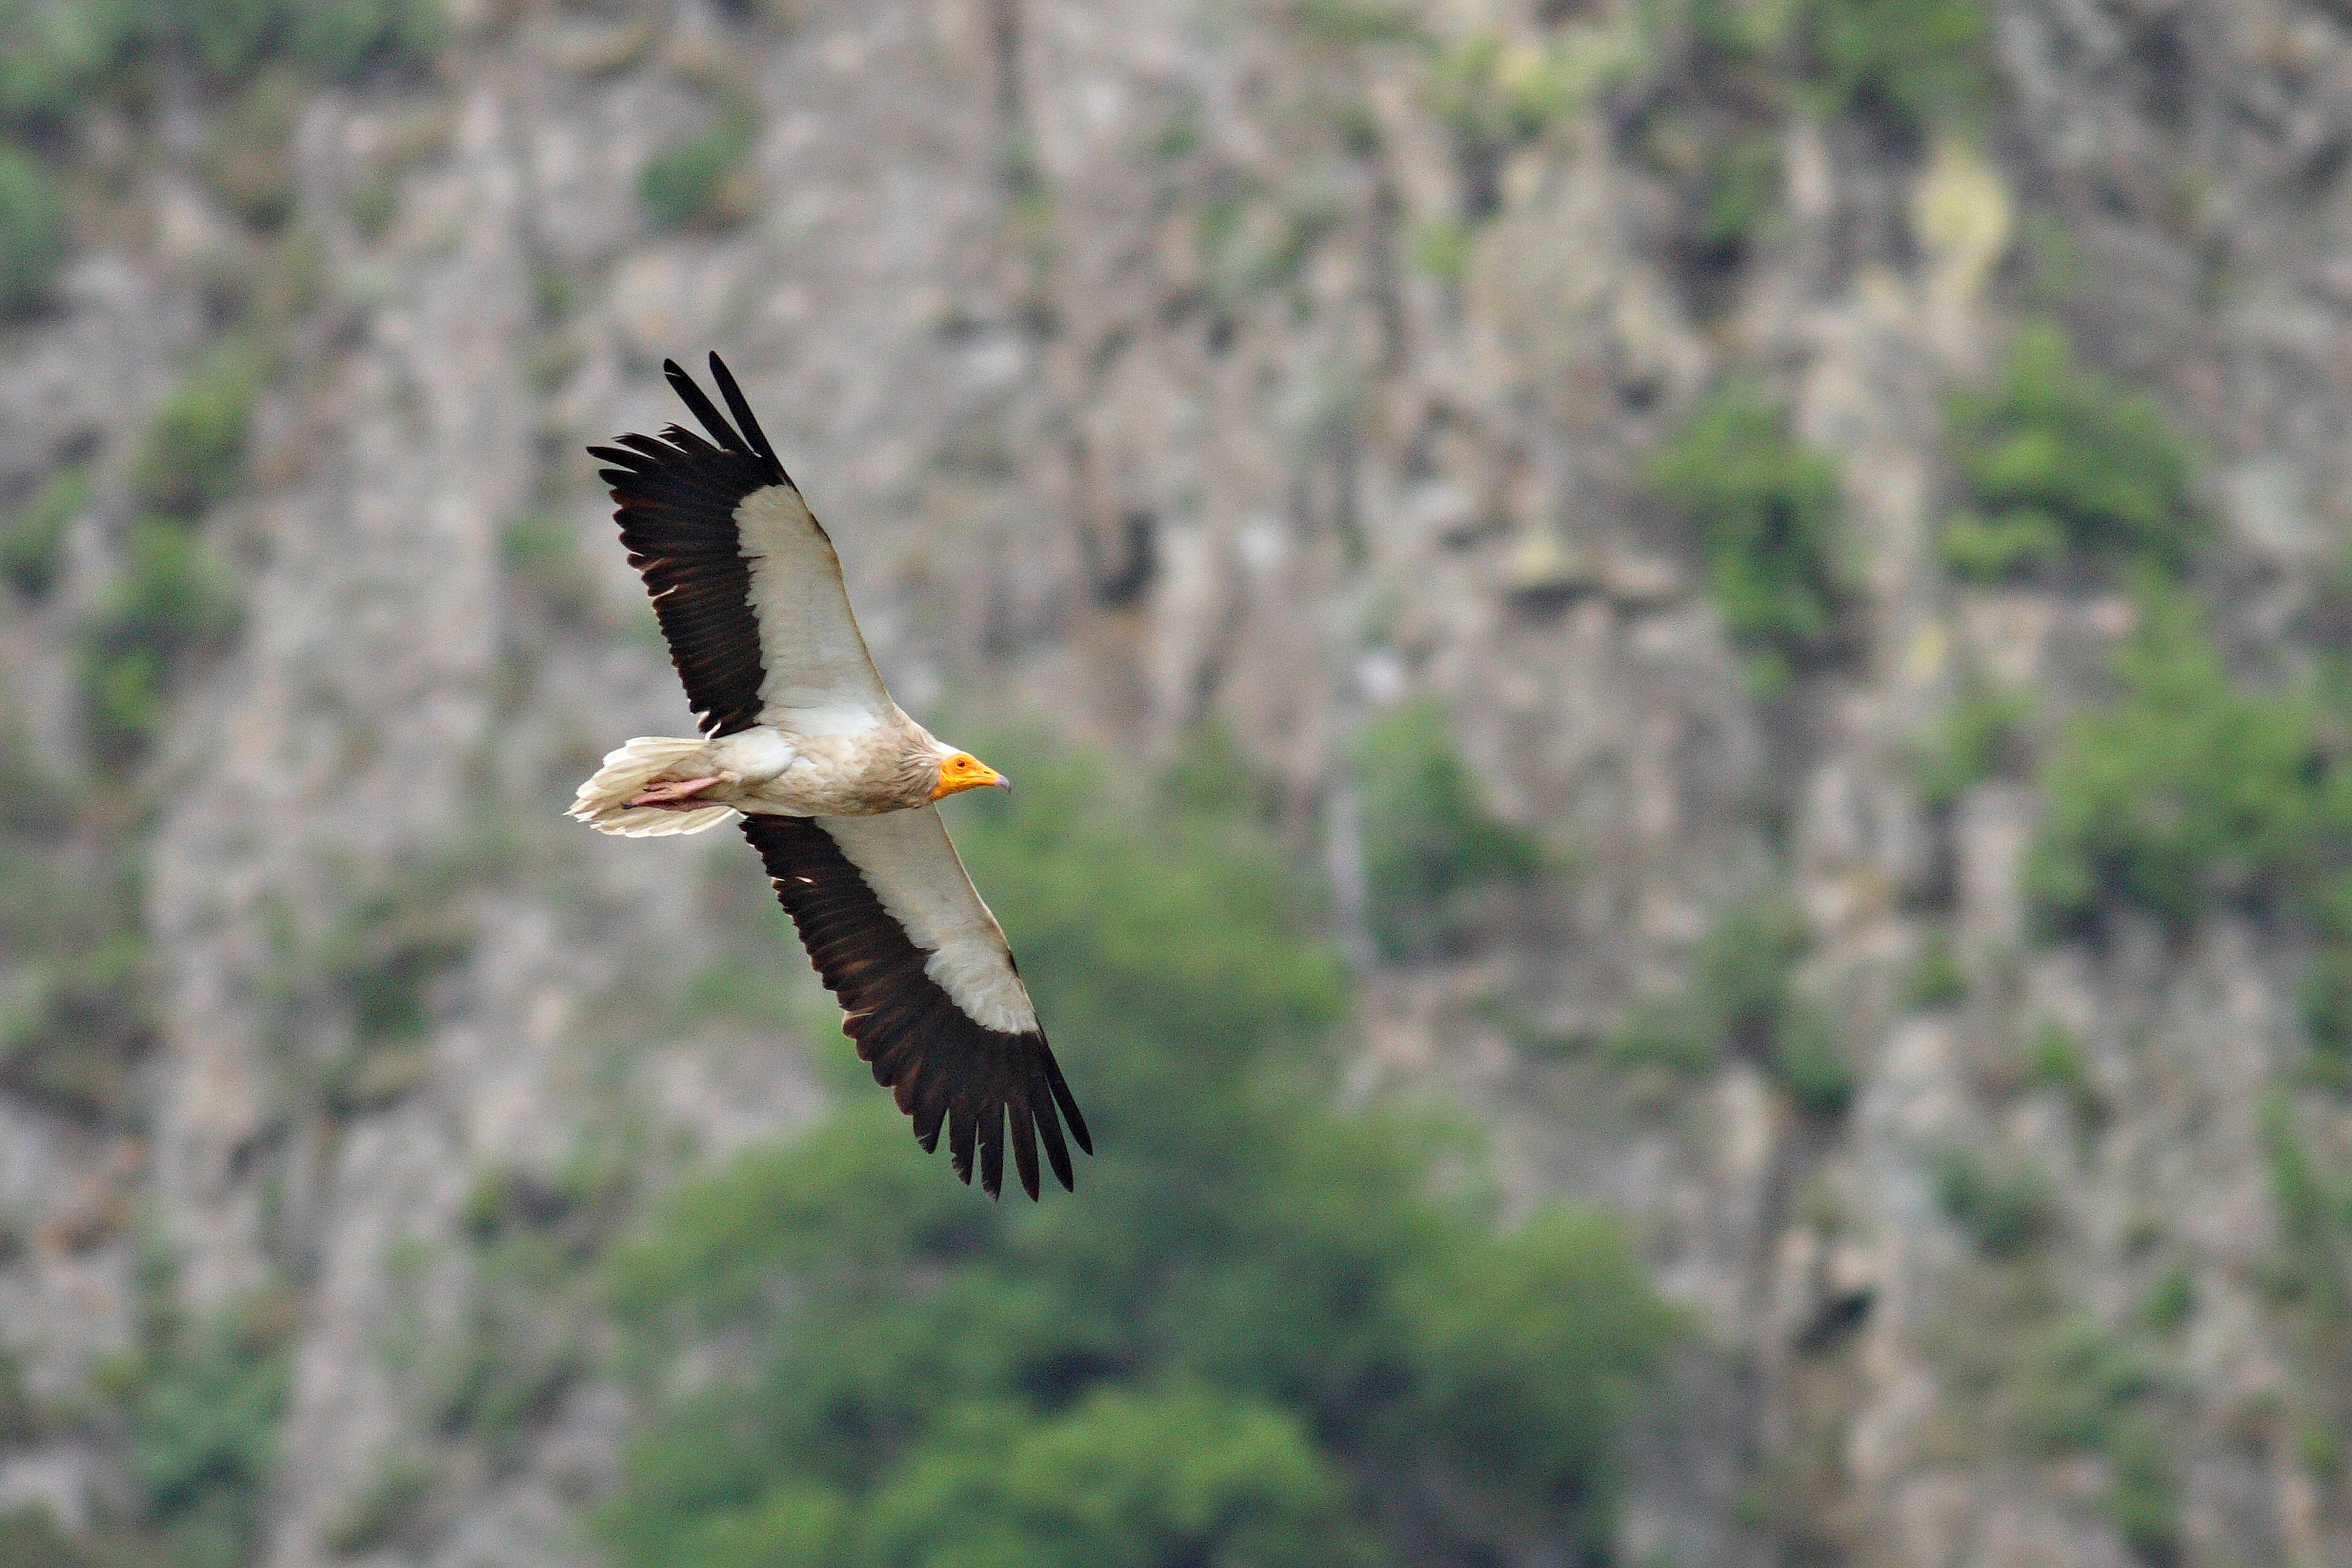 Have you read the latest issue of the Egyptian Vulture New Life newsletter?